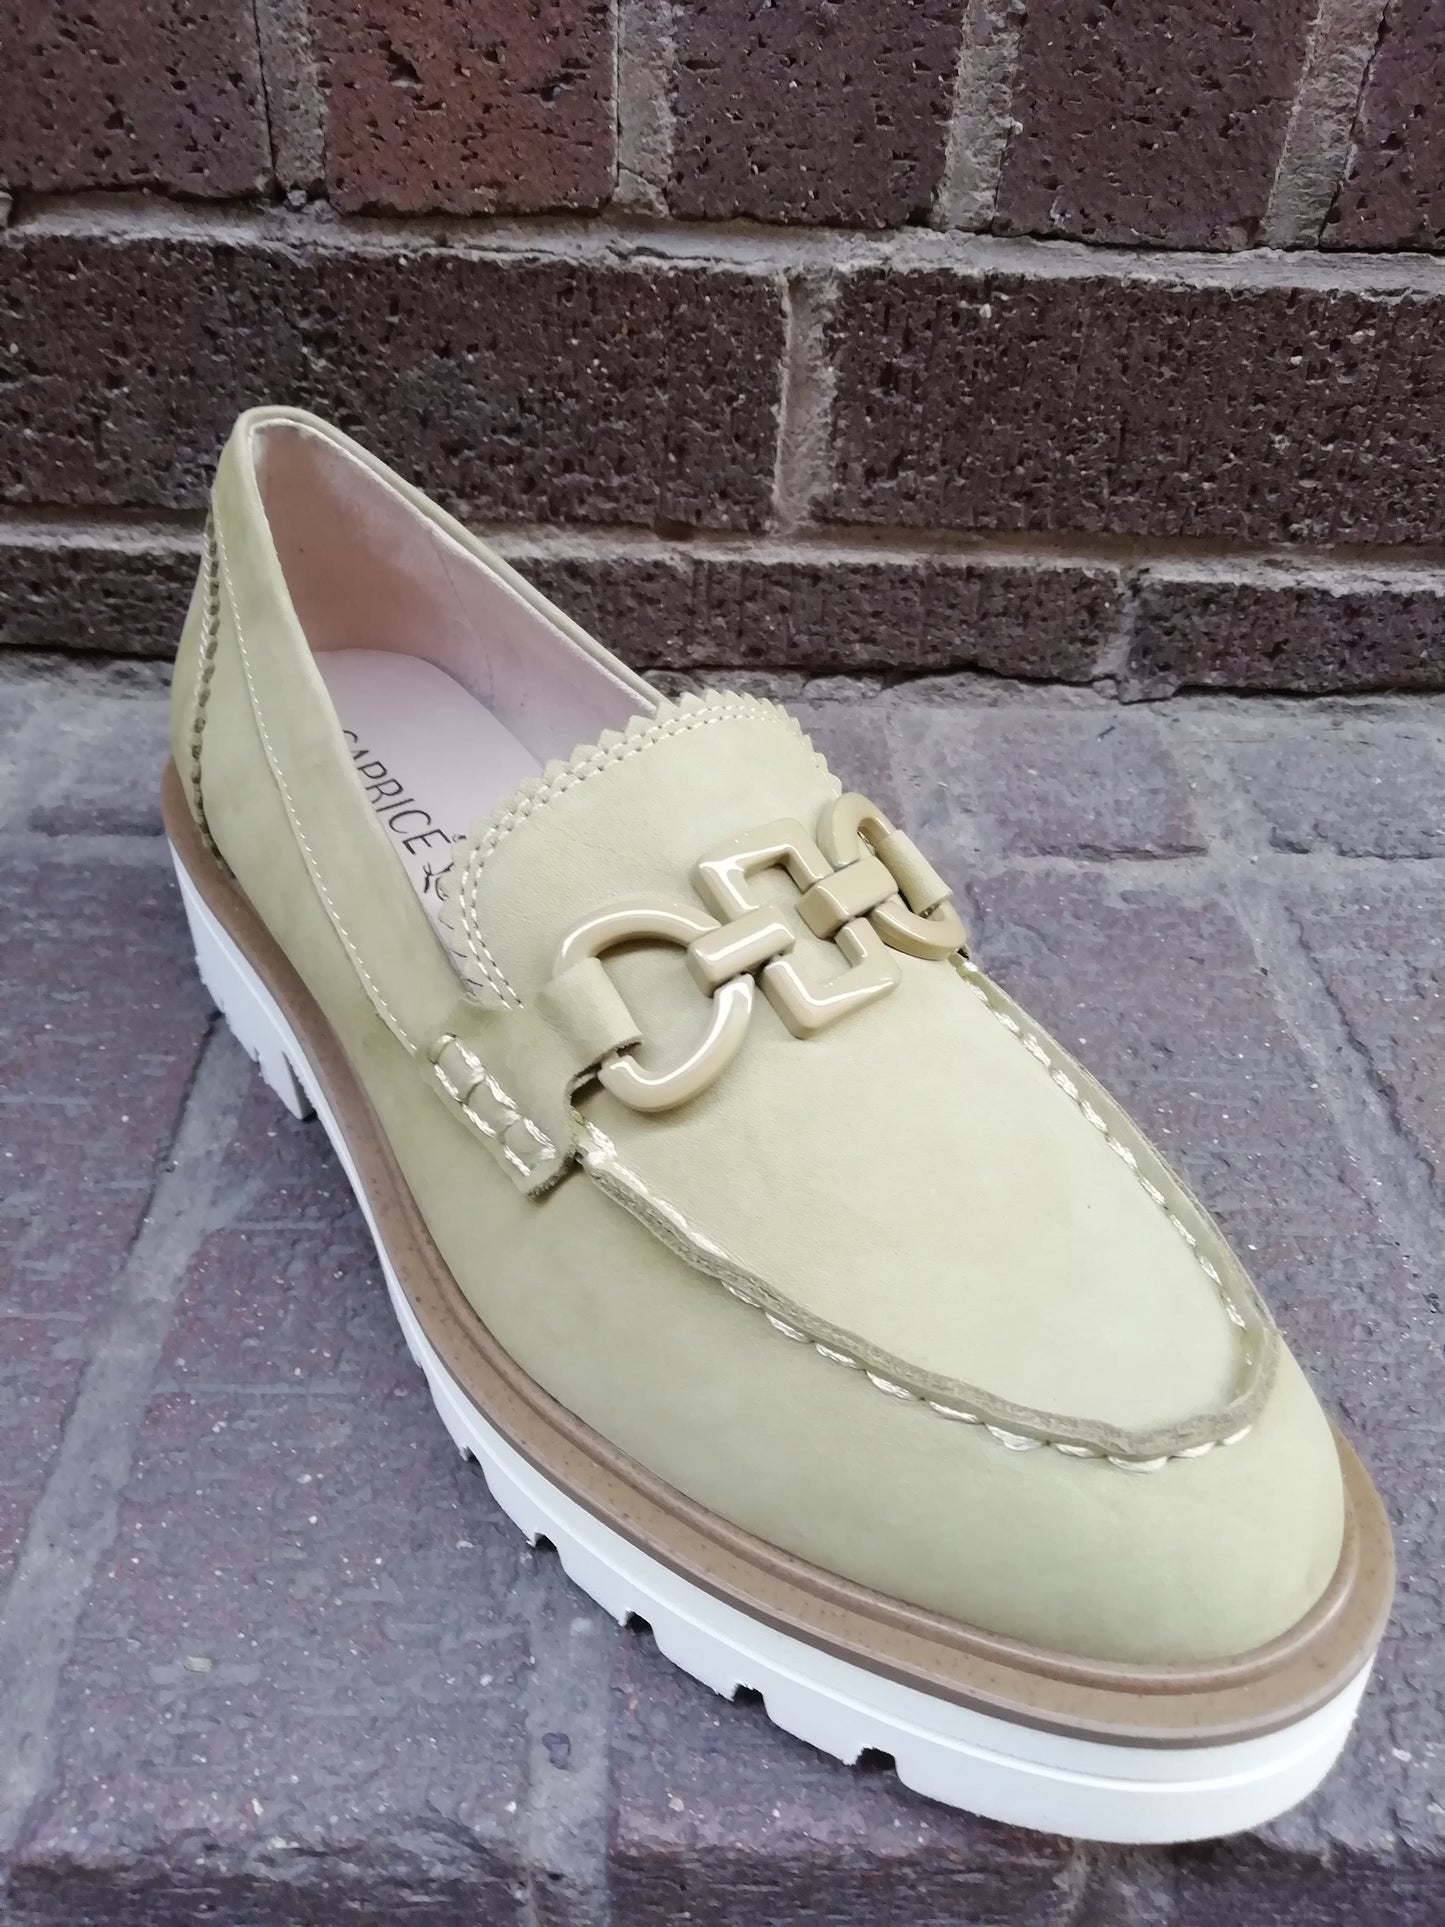 Caprice Green Nubuck Loafer. Only sizes 4 and 7.5 left.